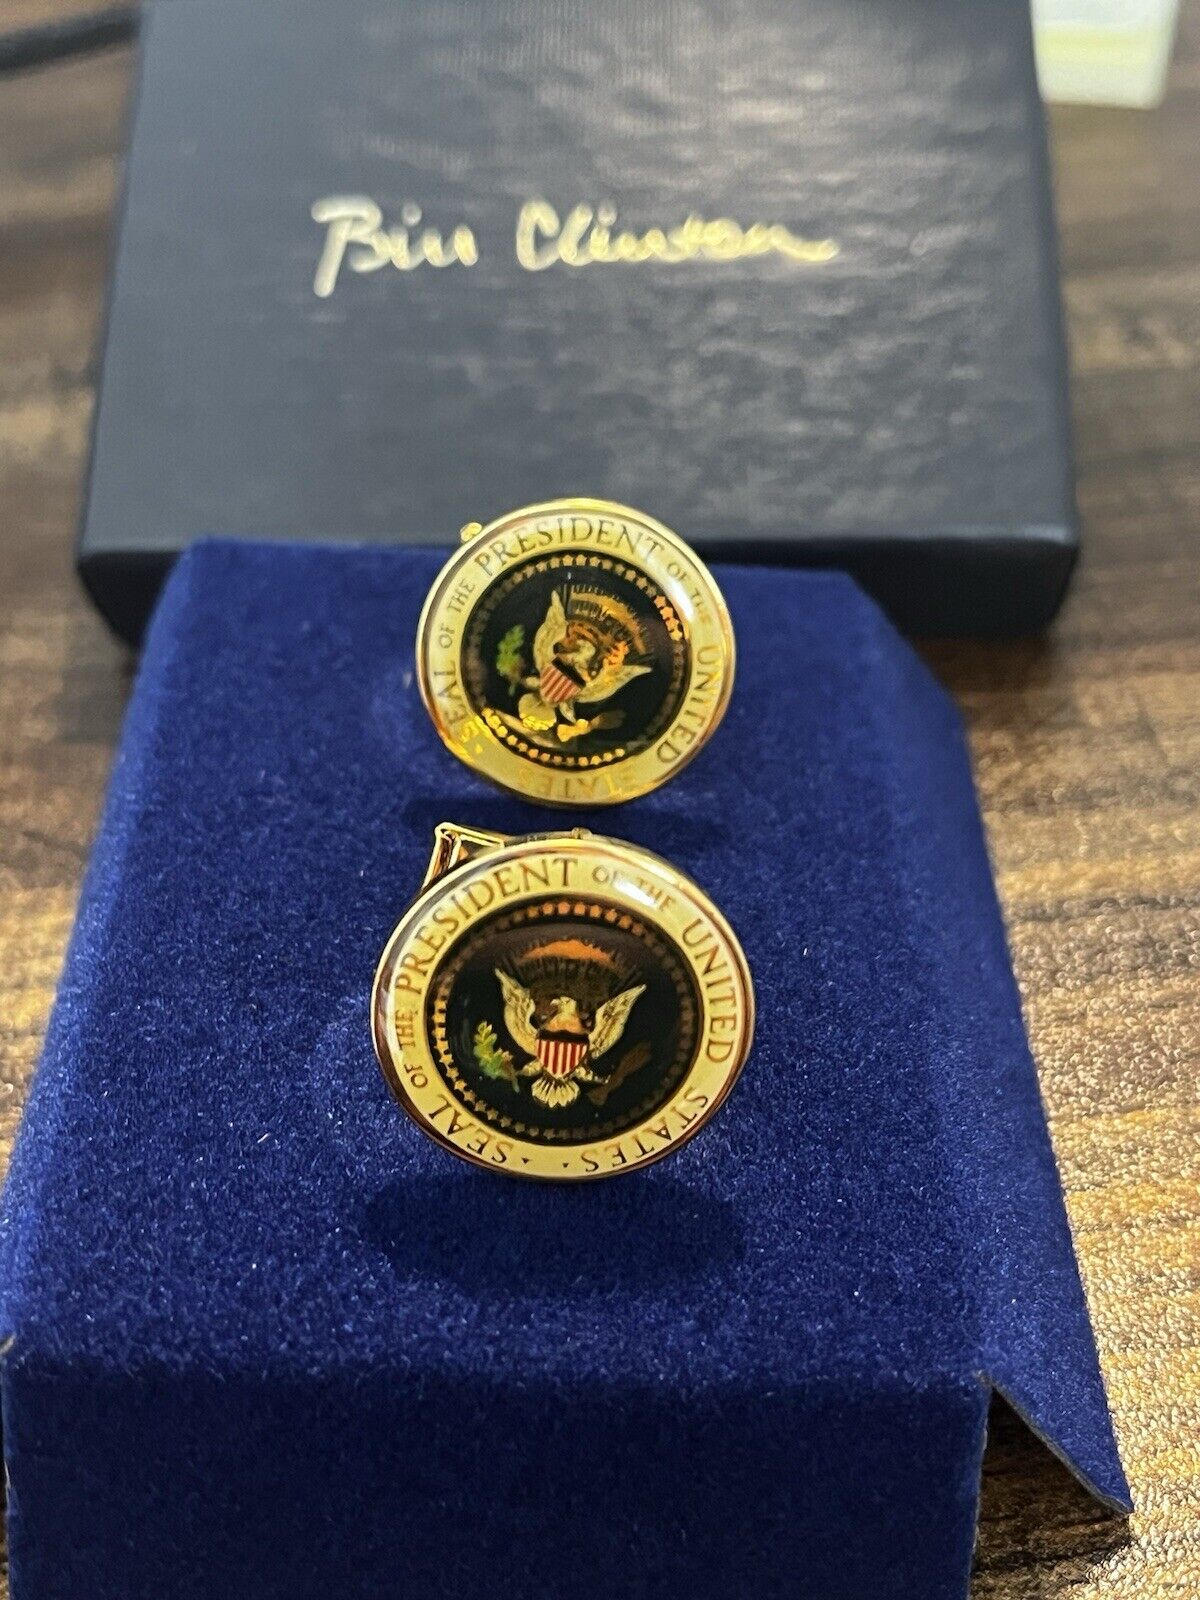 President Bill Clinton Presidential Seal Enameled Cuff Links -Engraved Signature